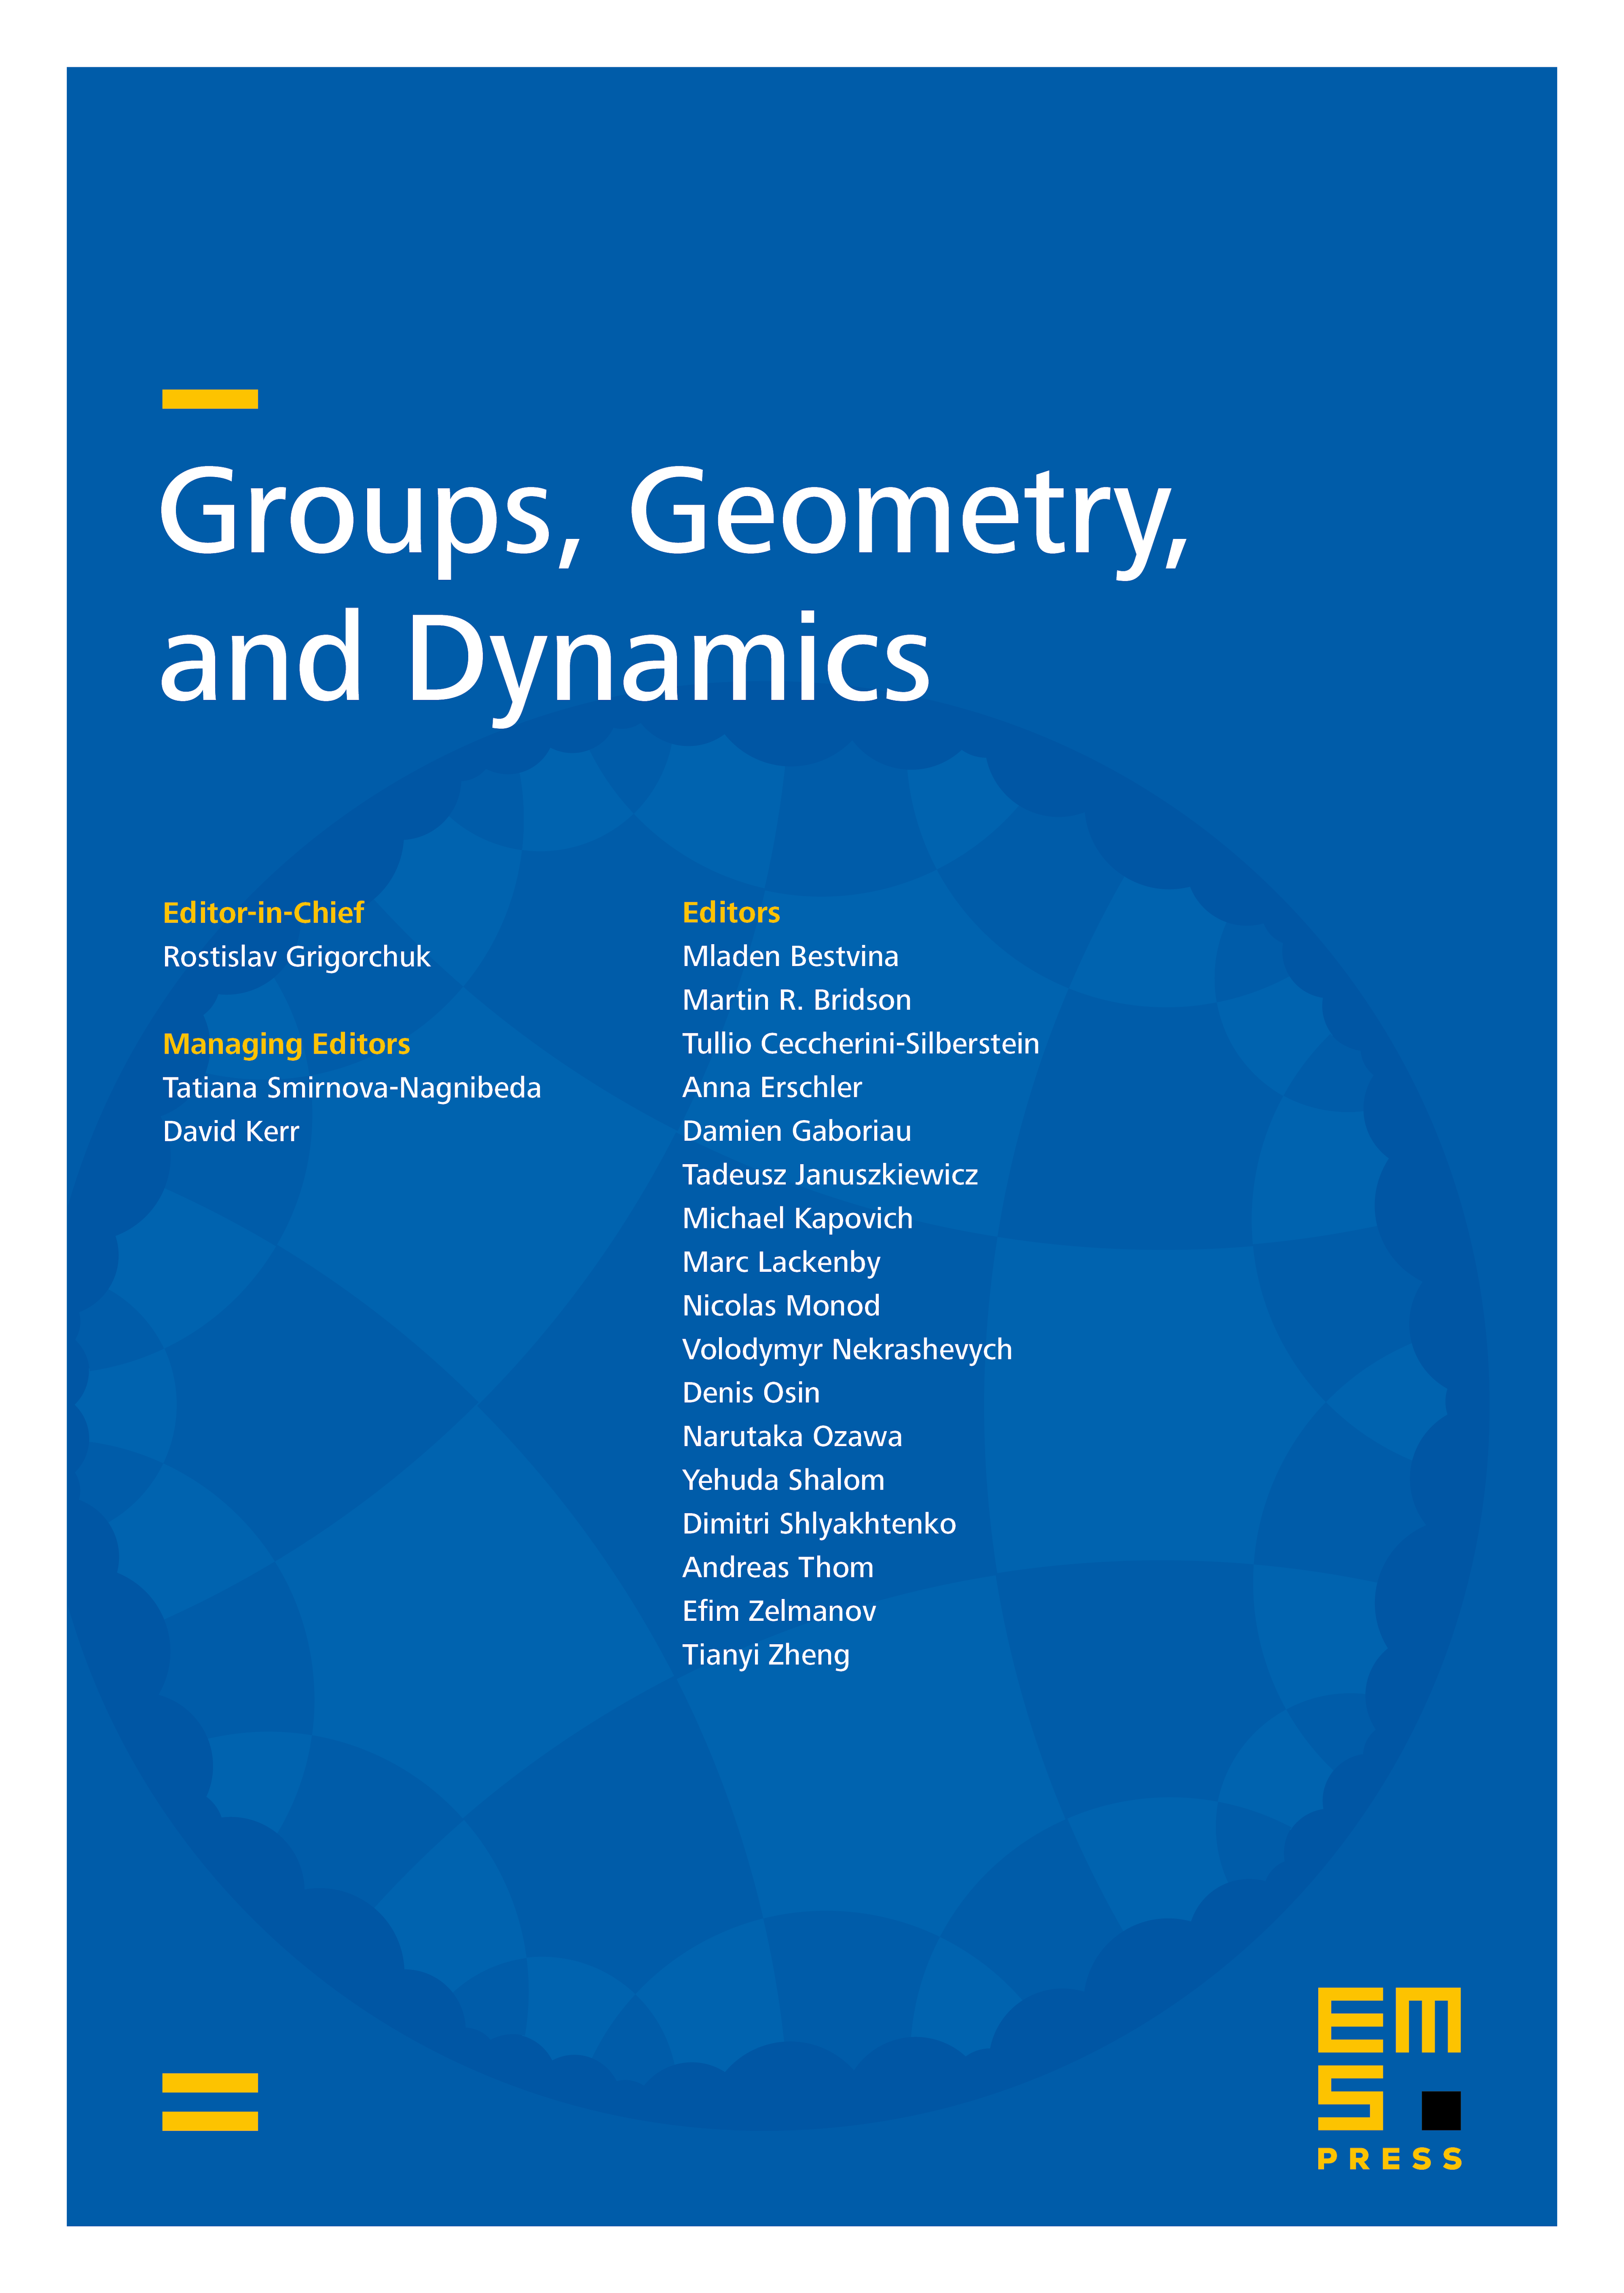 Relative subgroup growth and subgroup distortion cover